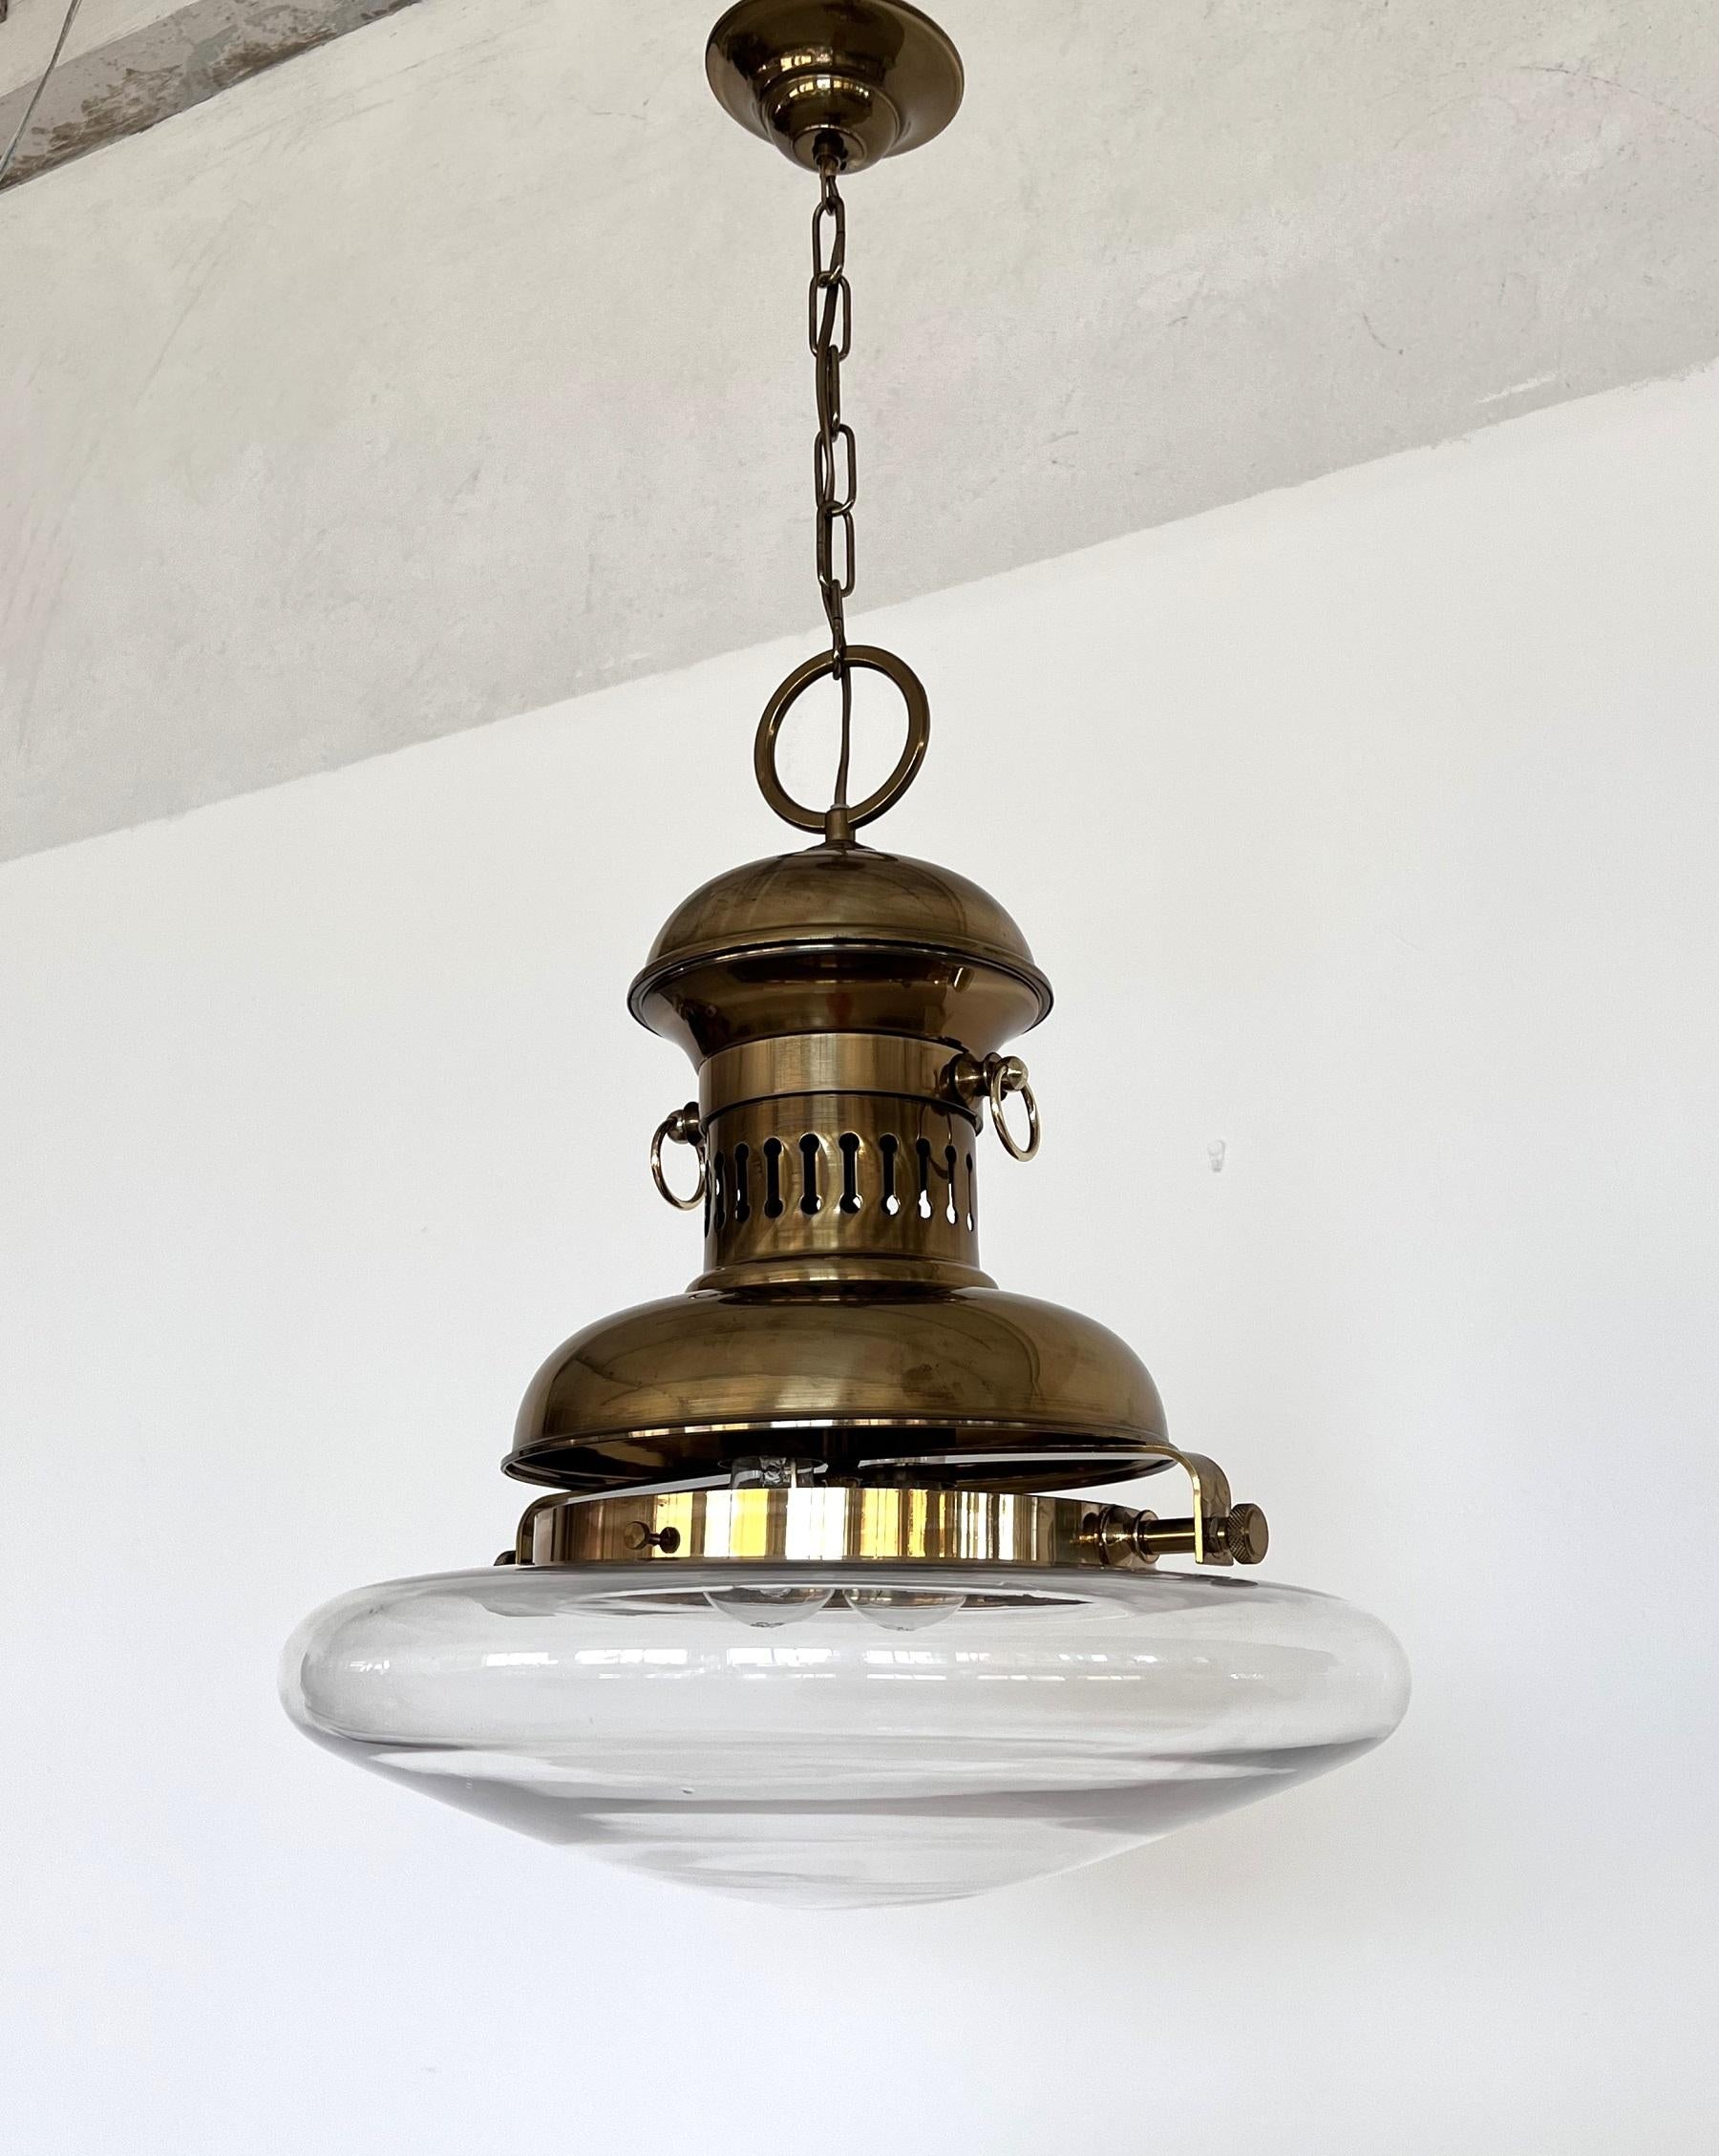 Italian Brass and Glass Pendant Lamp or Lantern in Nautical Style, 1970s For Sale 1